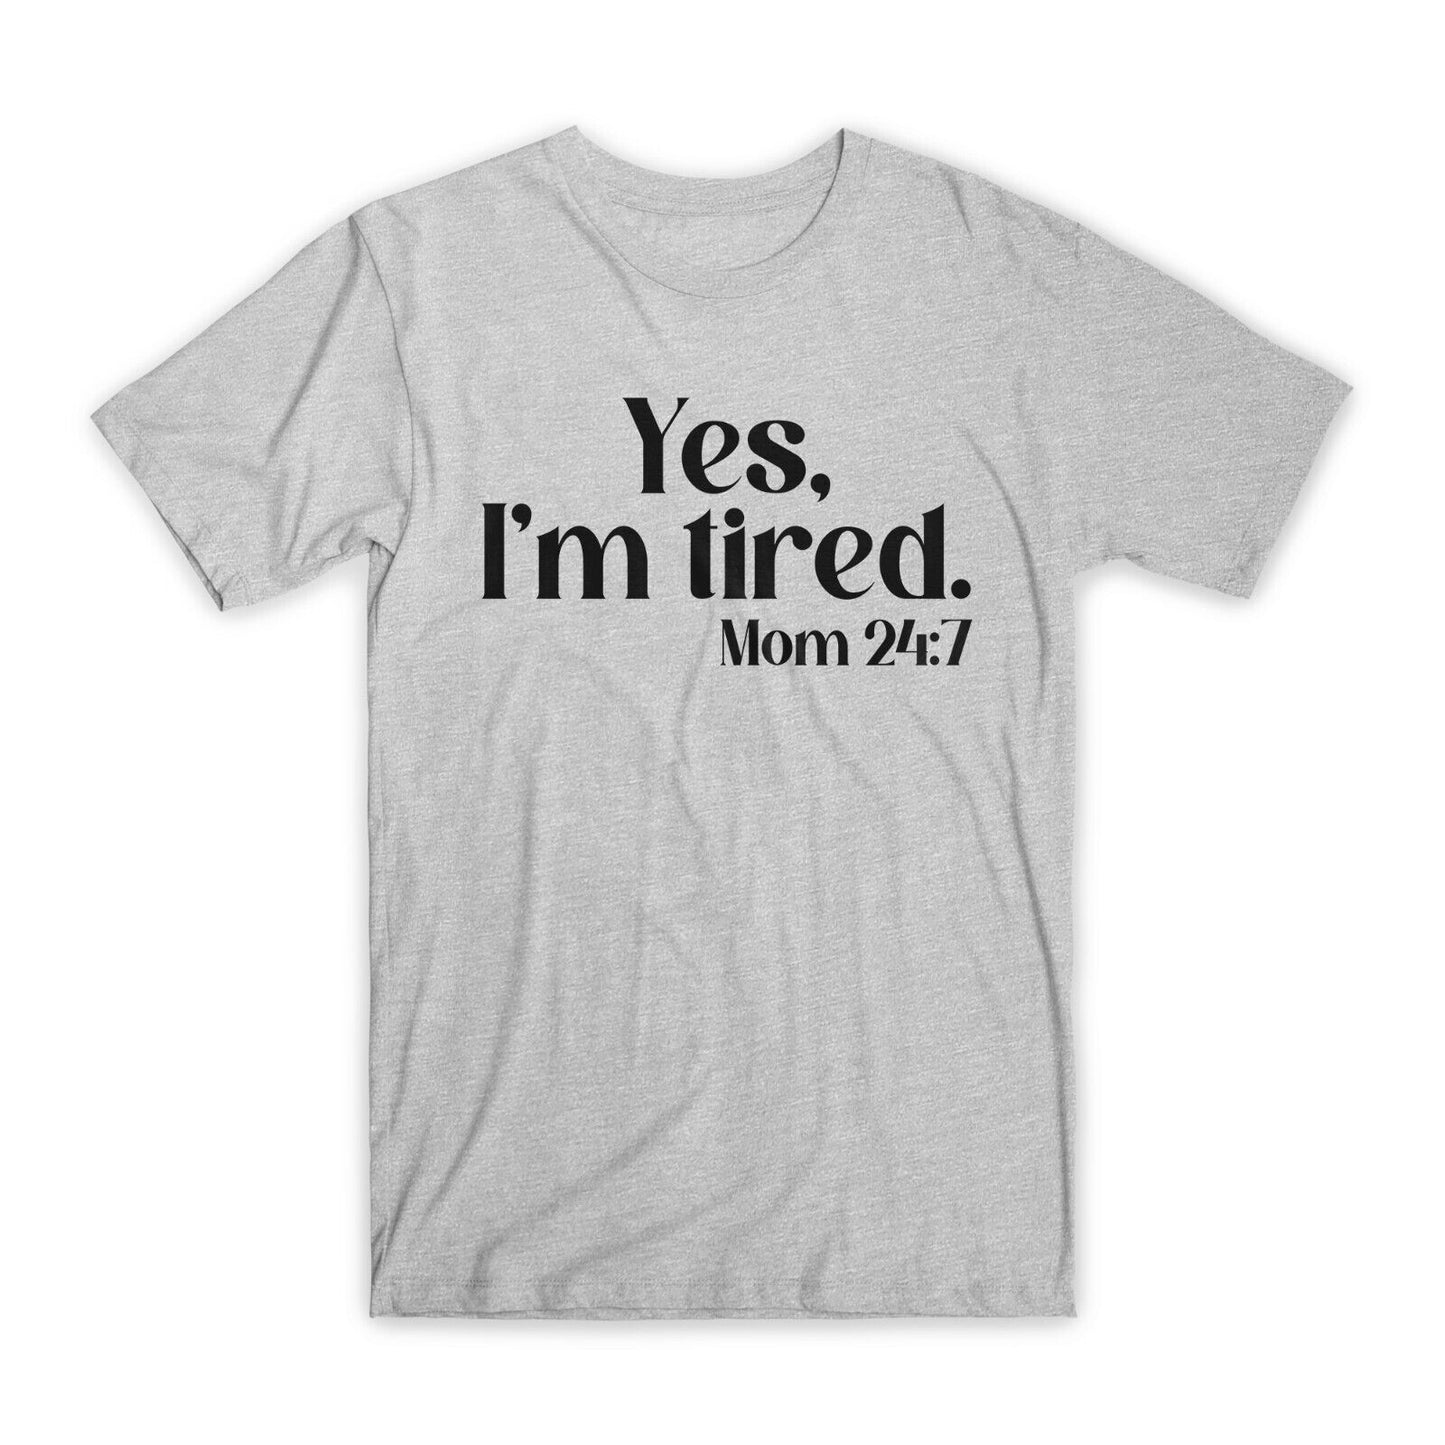 Yes I'm Tired T-Shirt Premium Soft Cotton Crew Neck Funny Tees Novelty Gifts NEW